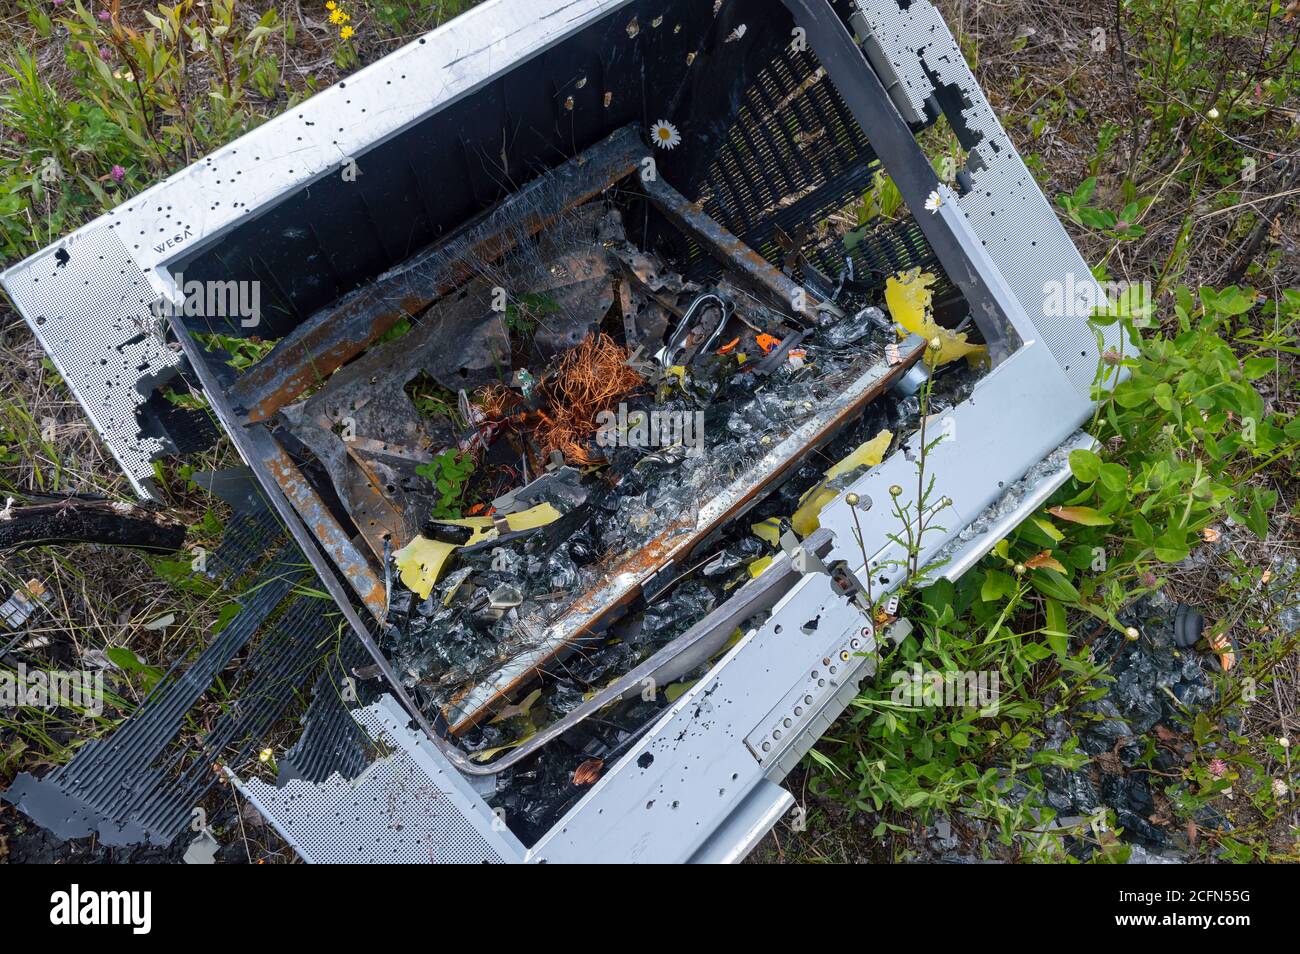 British Columbia, Canada - June 24, 2016: A destroyed and abandoned television set Stock Photo